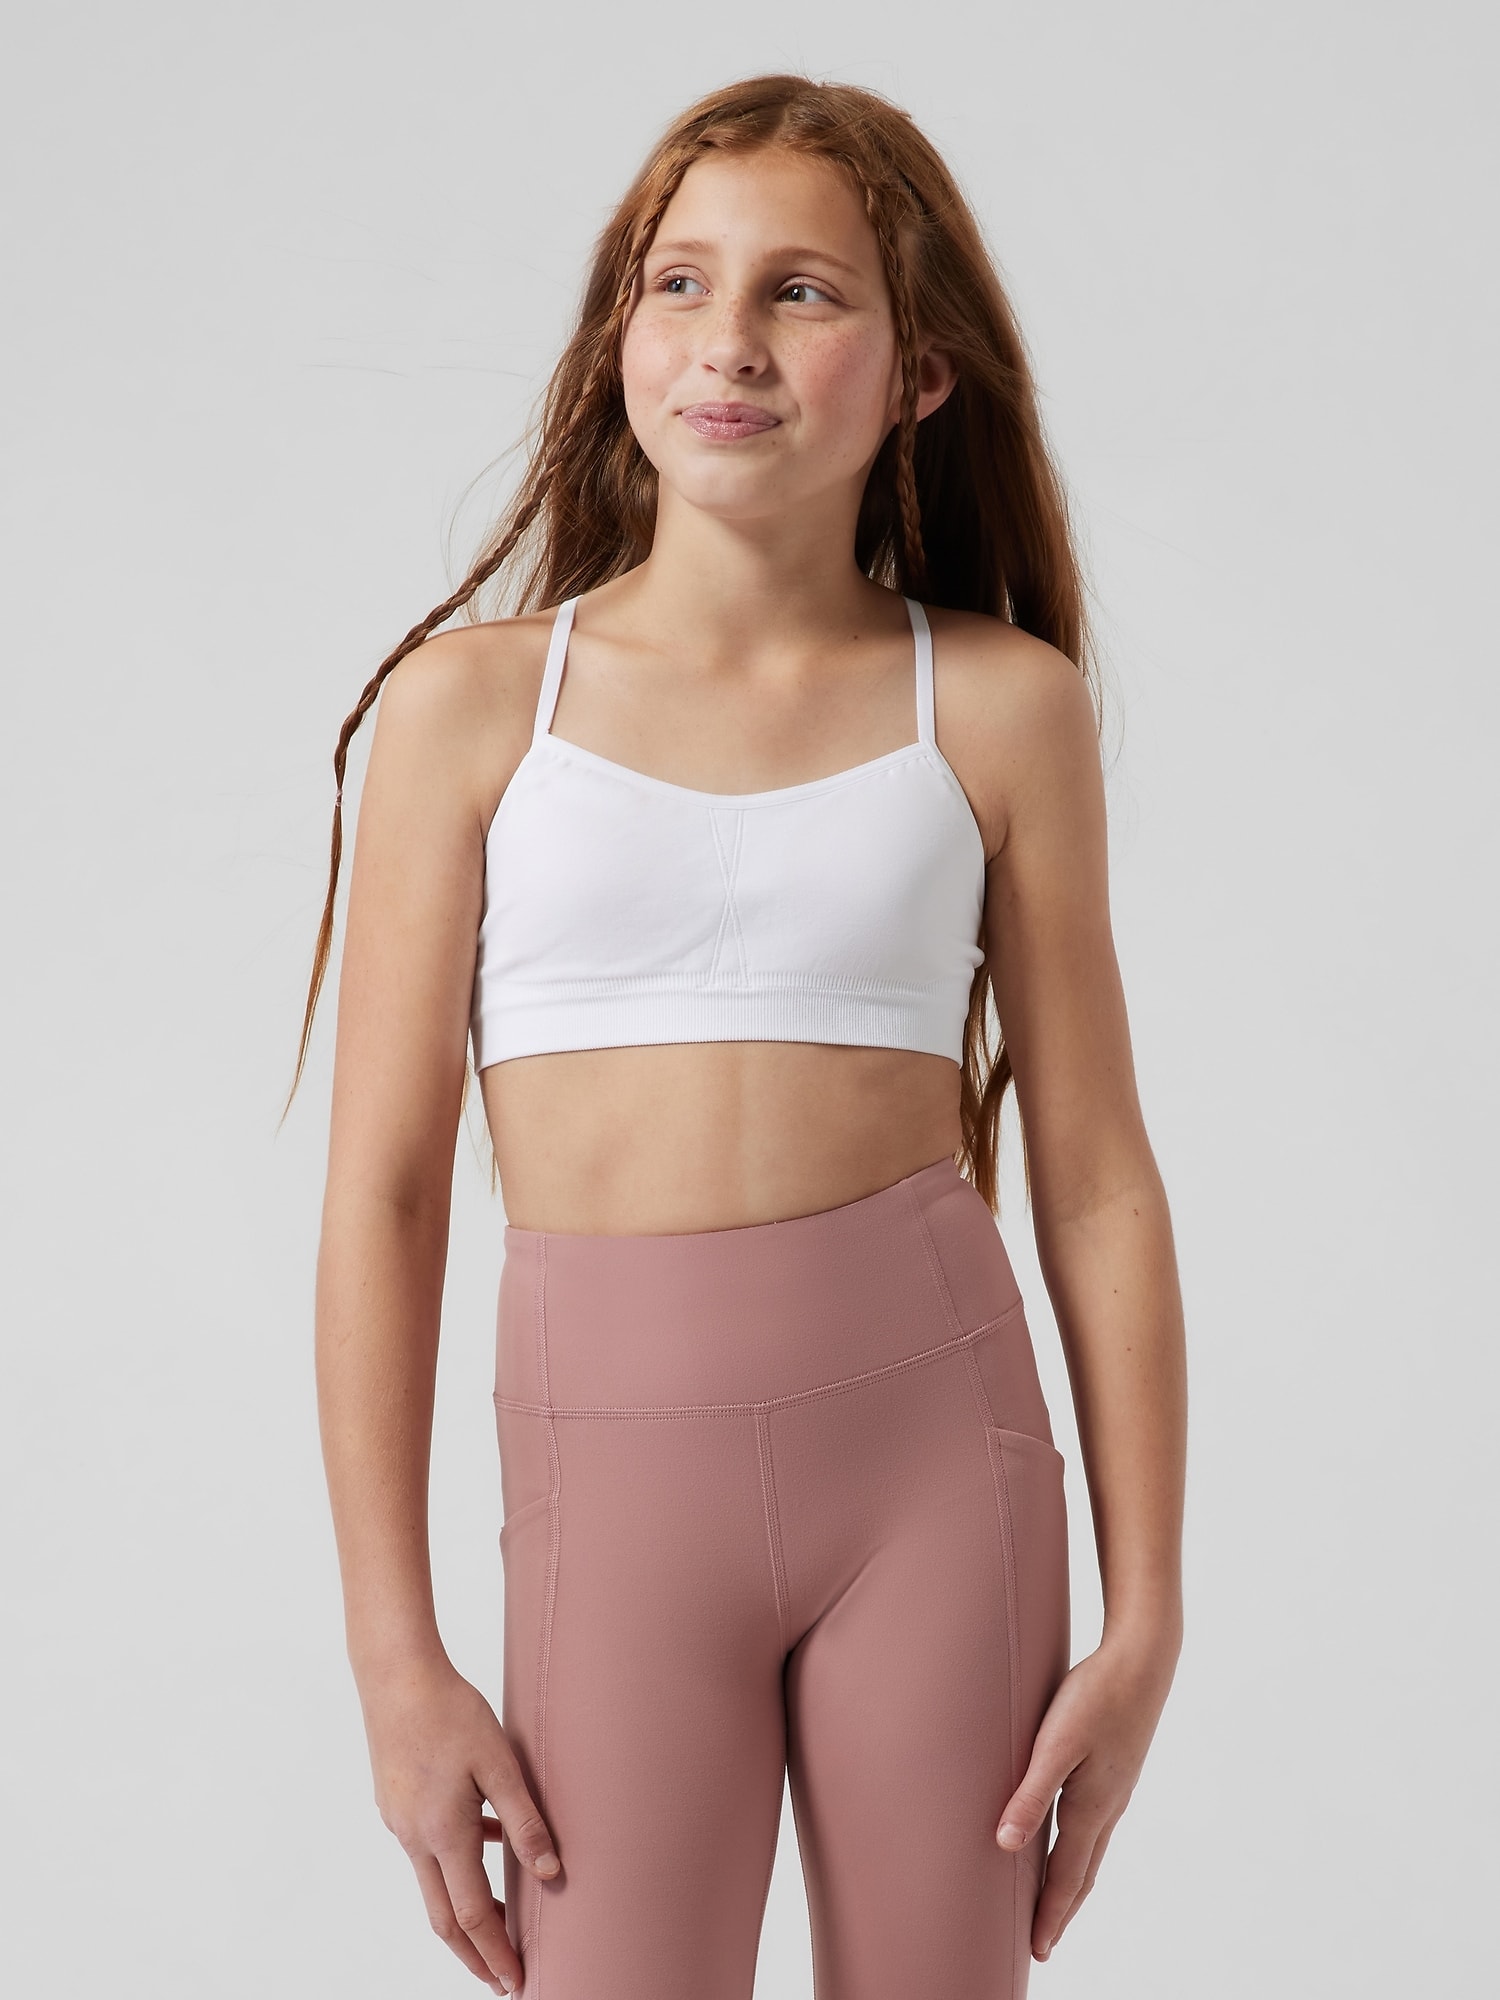 12 best training bras for girls and tweens